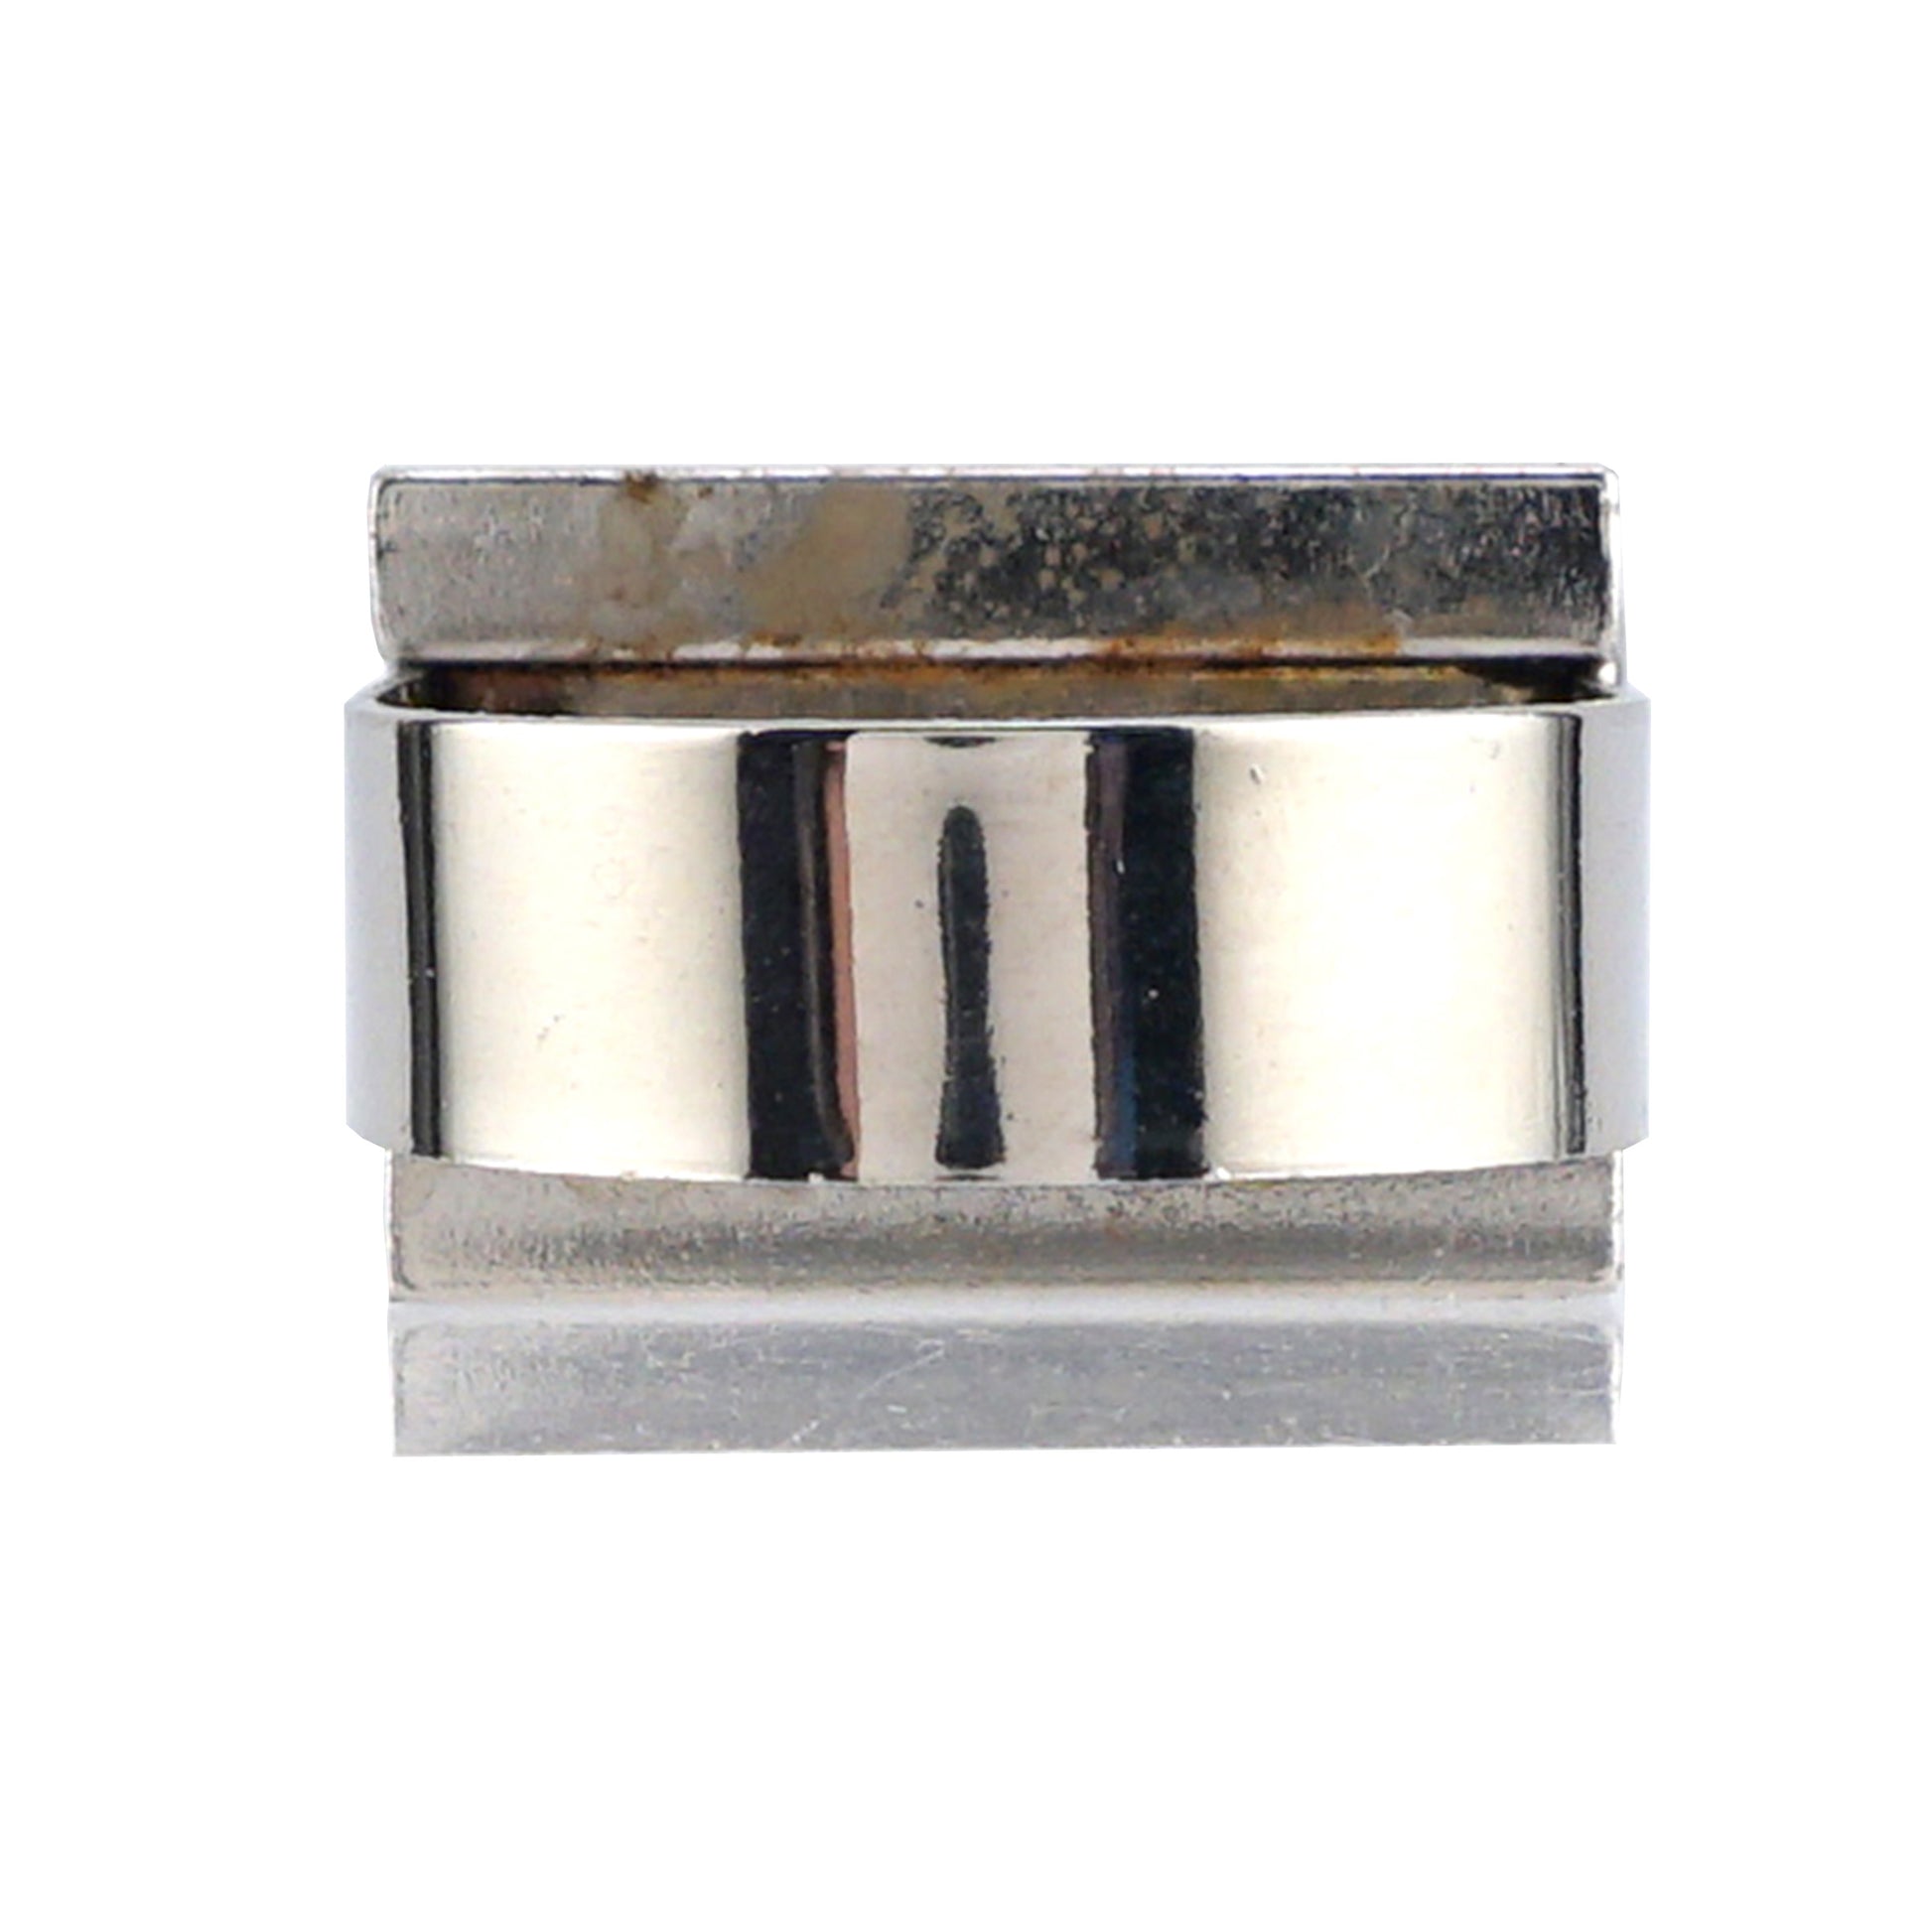 Load image into Gallery viewer, HMC34NC Channel Letter Trim Cap Holding Magnet - Bottom View